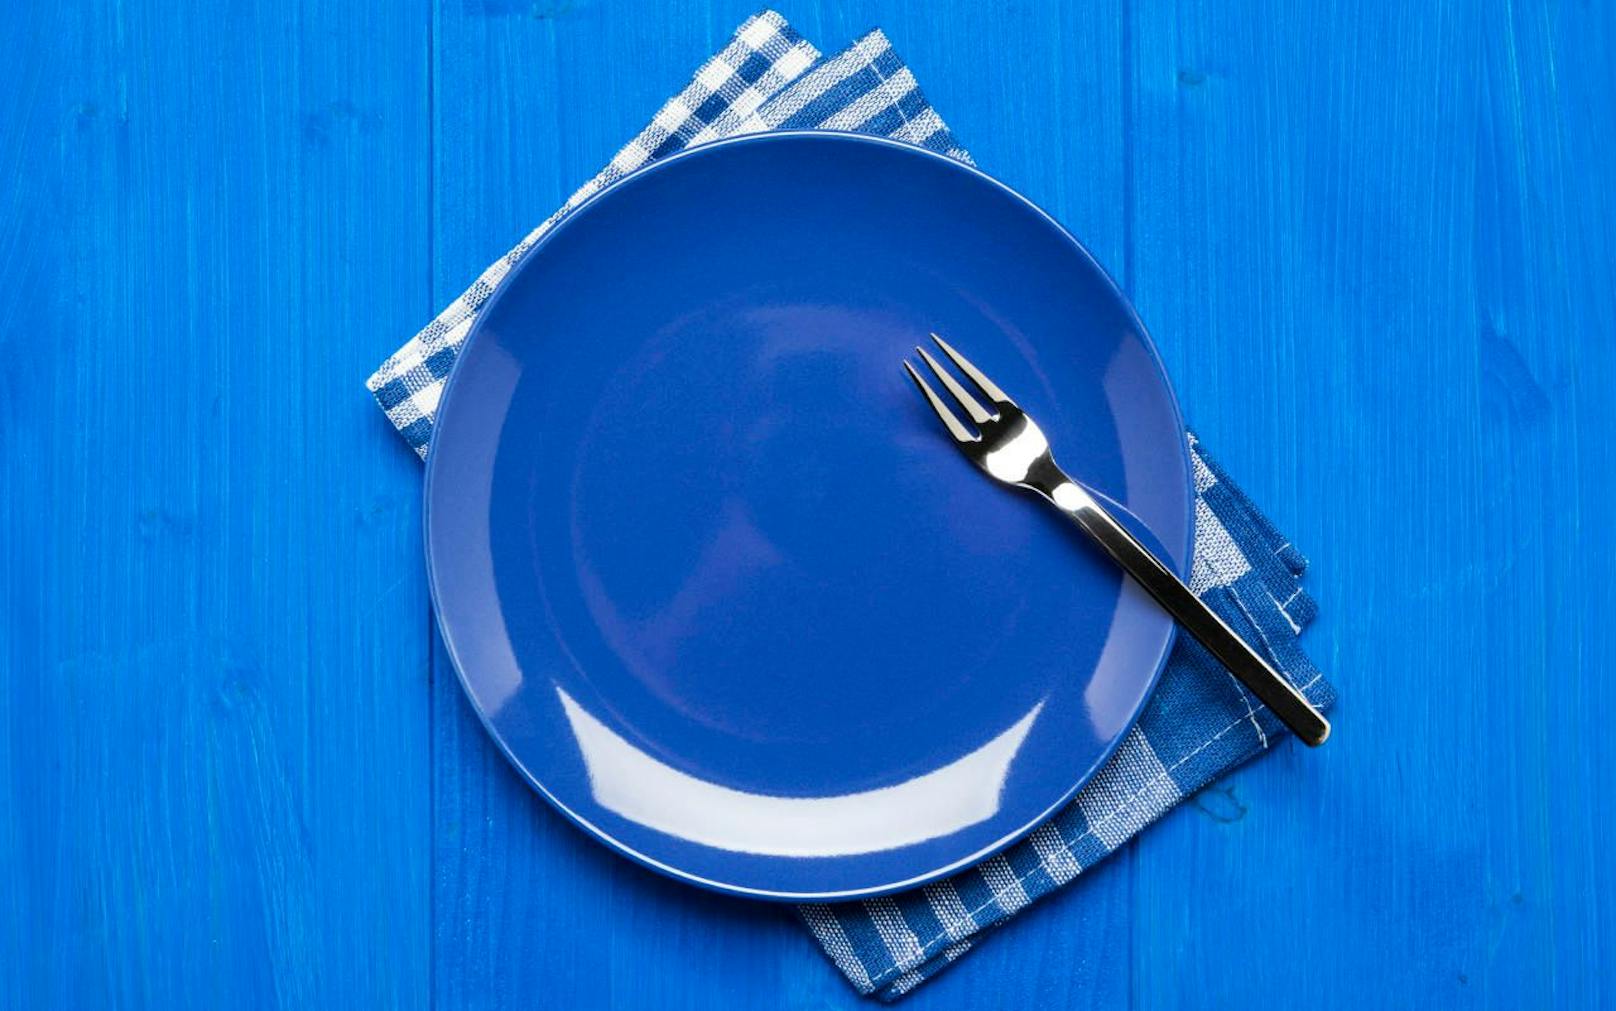 Blue plate with fork on napkin and blue table